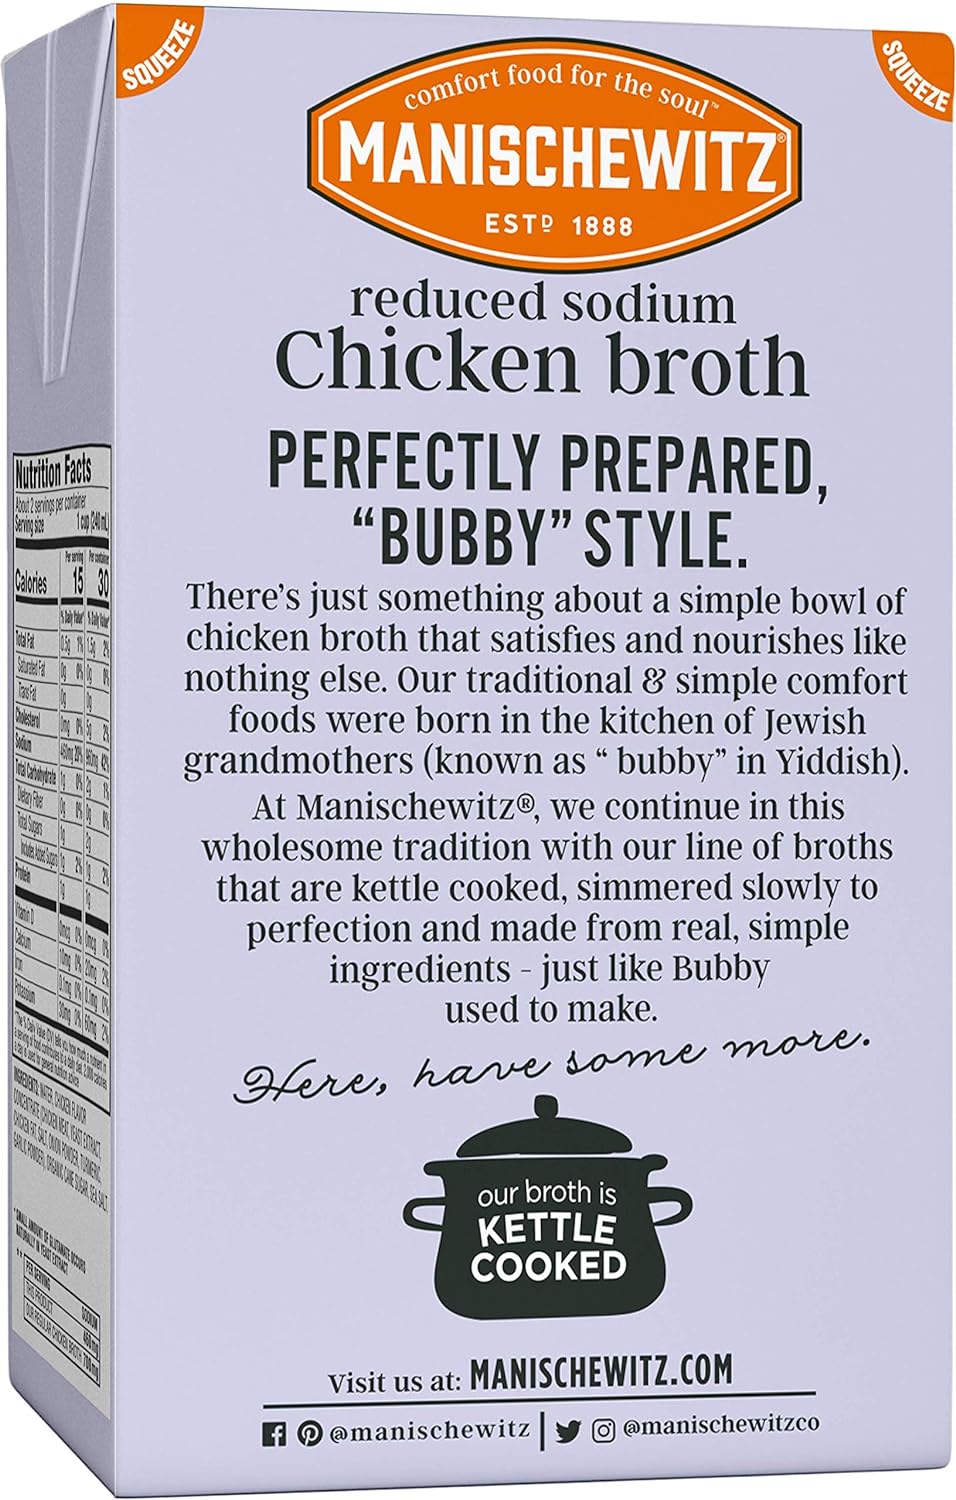 Manischewitz Reduced Sodium Chicken Broth 17oz (3 Pack), Flavorful, Kettle Cooked, Slowly Simmered, Kosher for Passover : Grocery & Gourmet Food